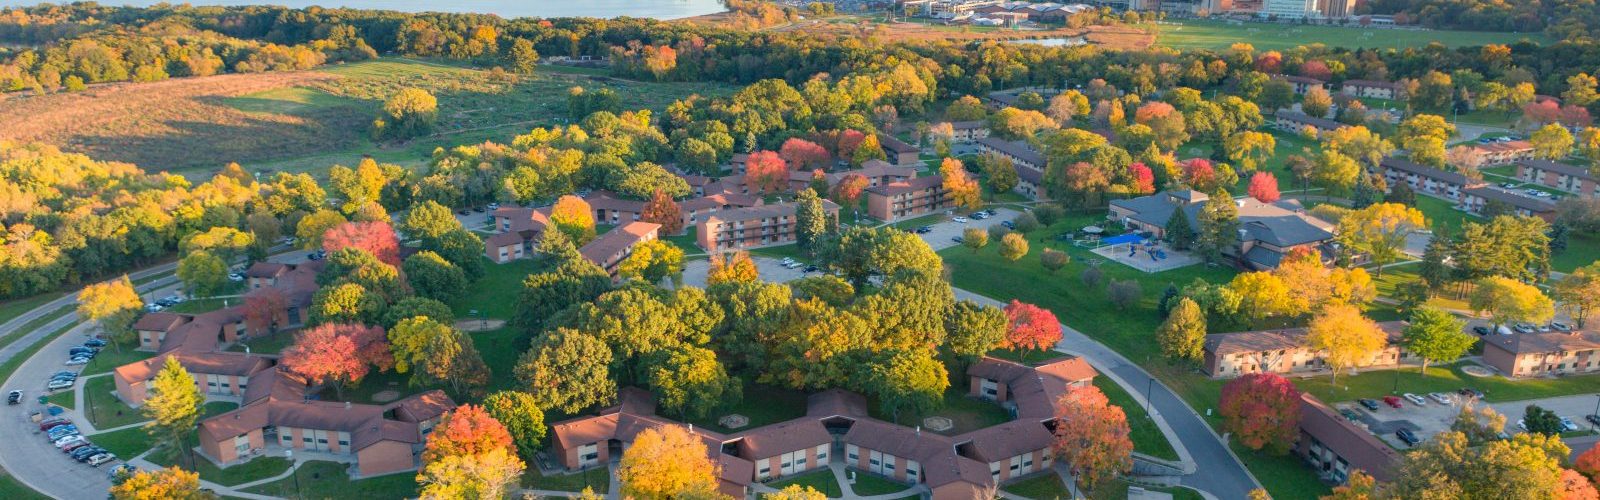 An aerial view of the Eagle Heights Neighborhood in University Apartments at sunset in fall